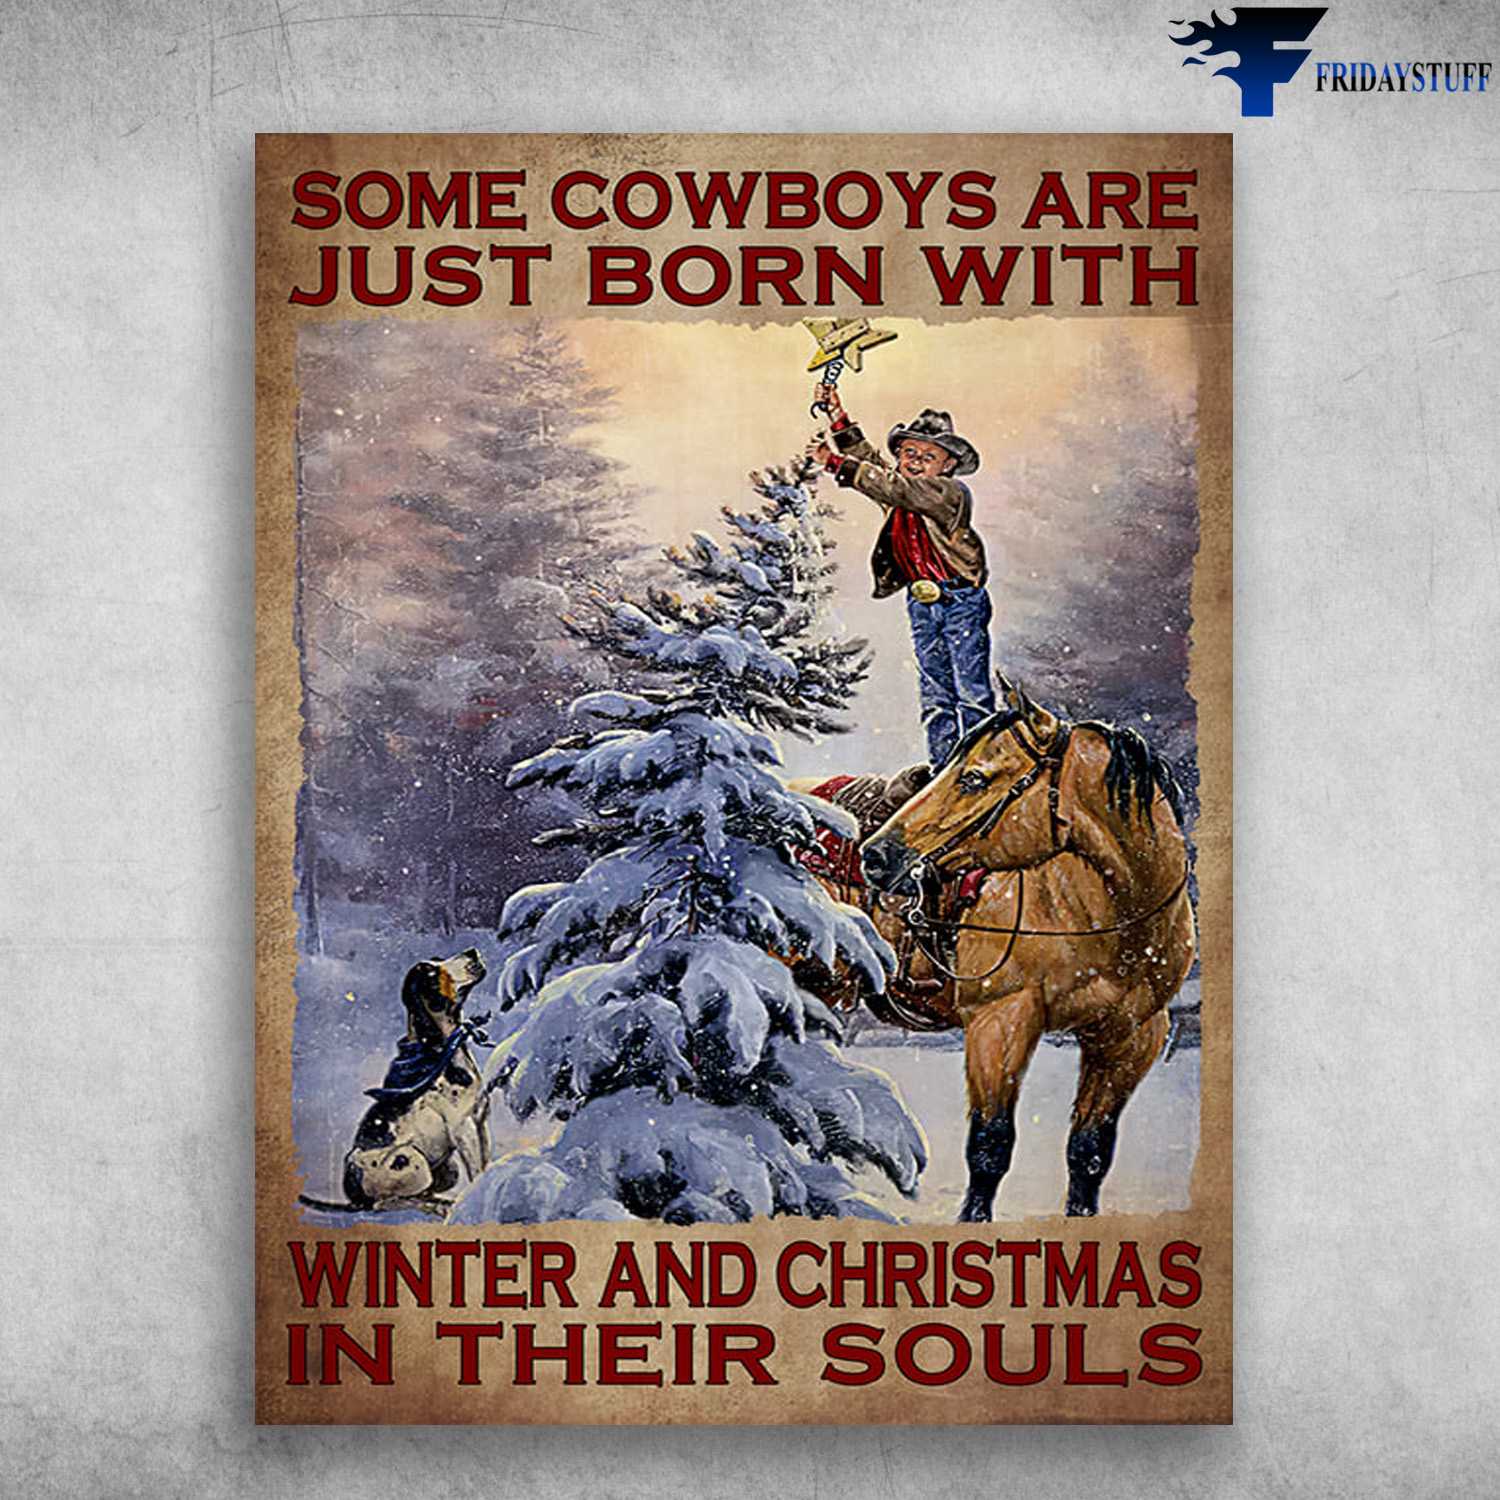 Cowboy And Dog, Christmas Poster - Some Cowboys Are Just Born With, Winter And Christmas, In Their Souls